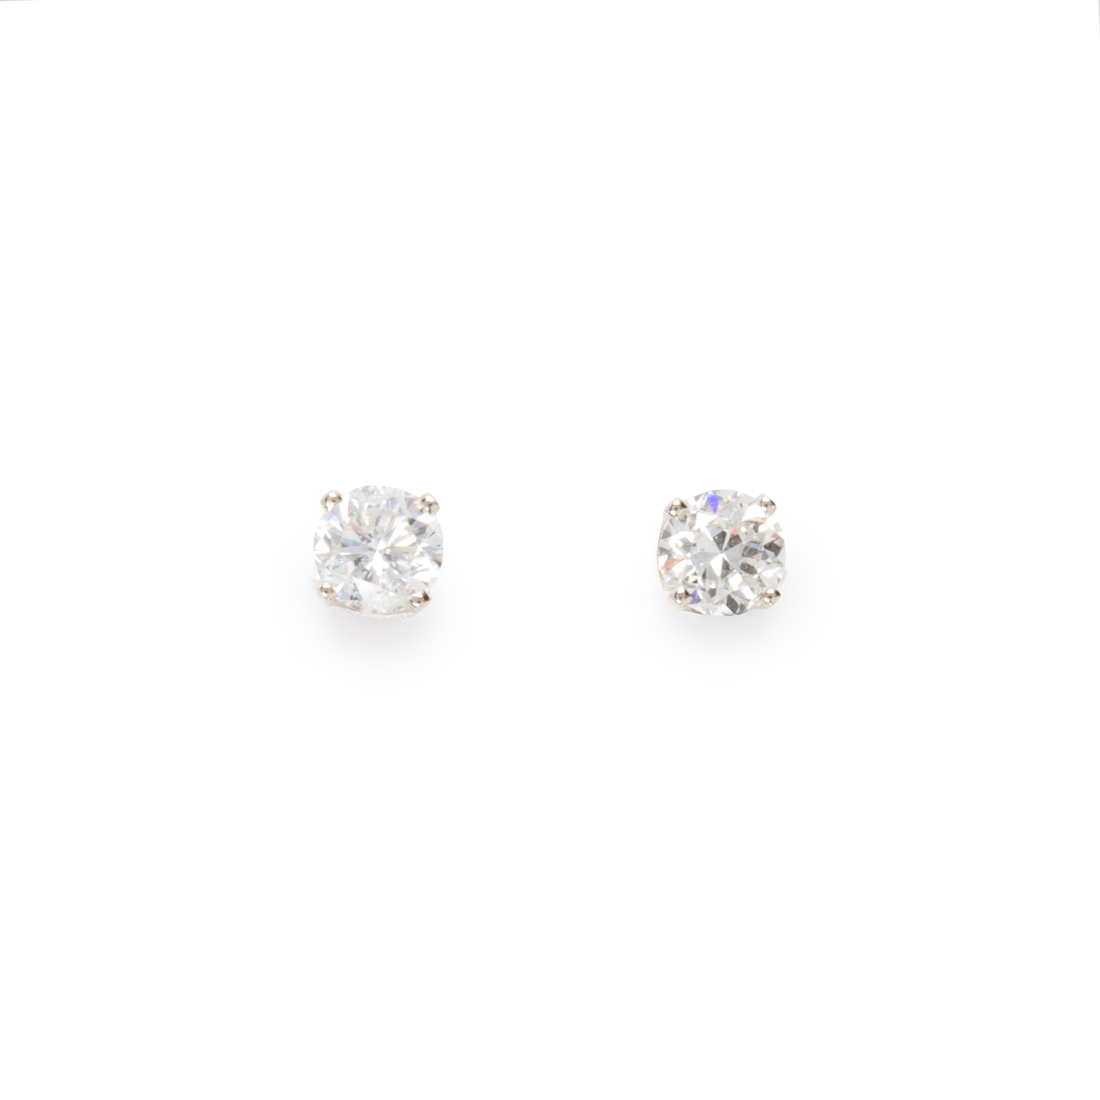 A PAIR OF DIAMOND AND FOURTEEN